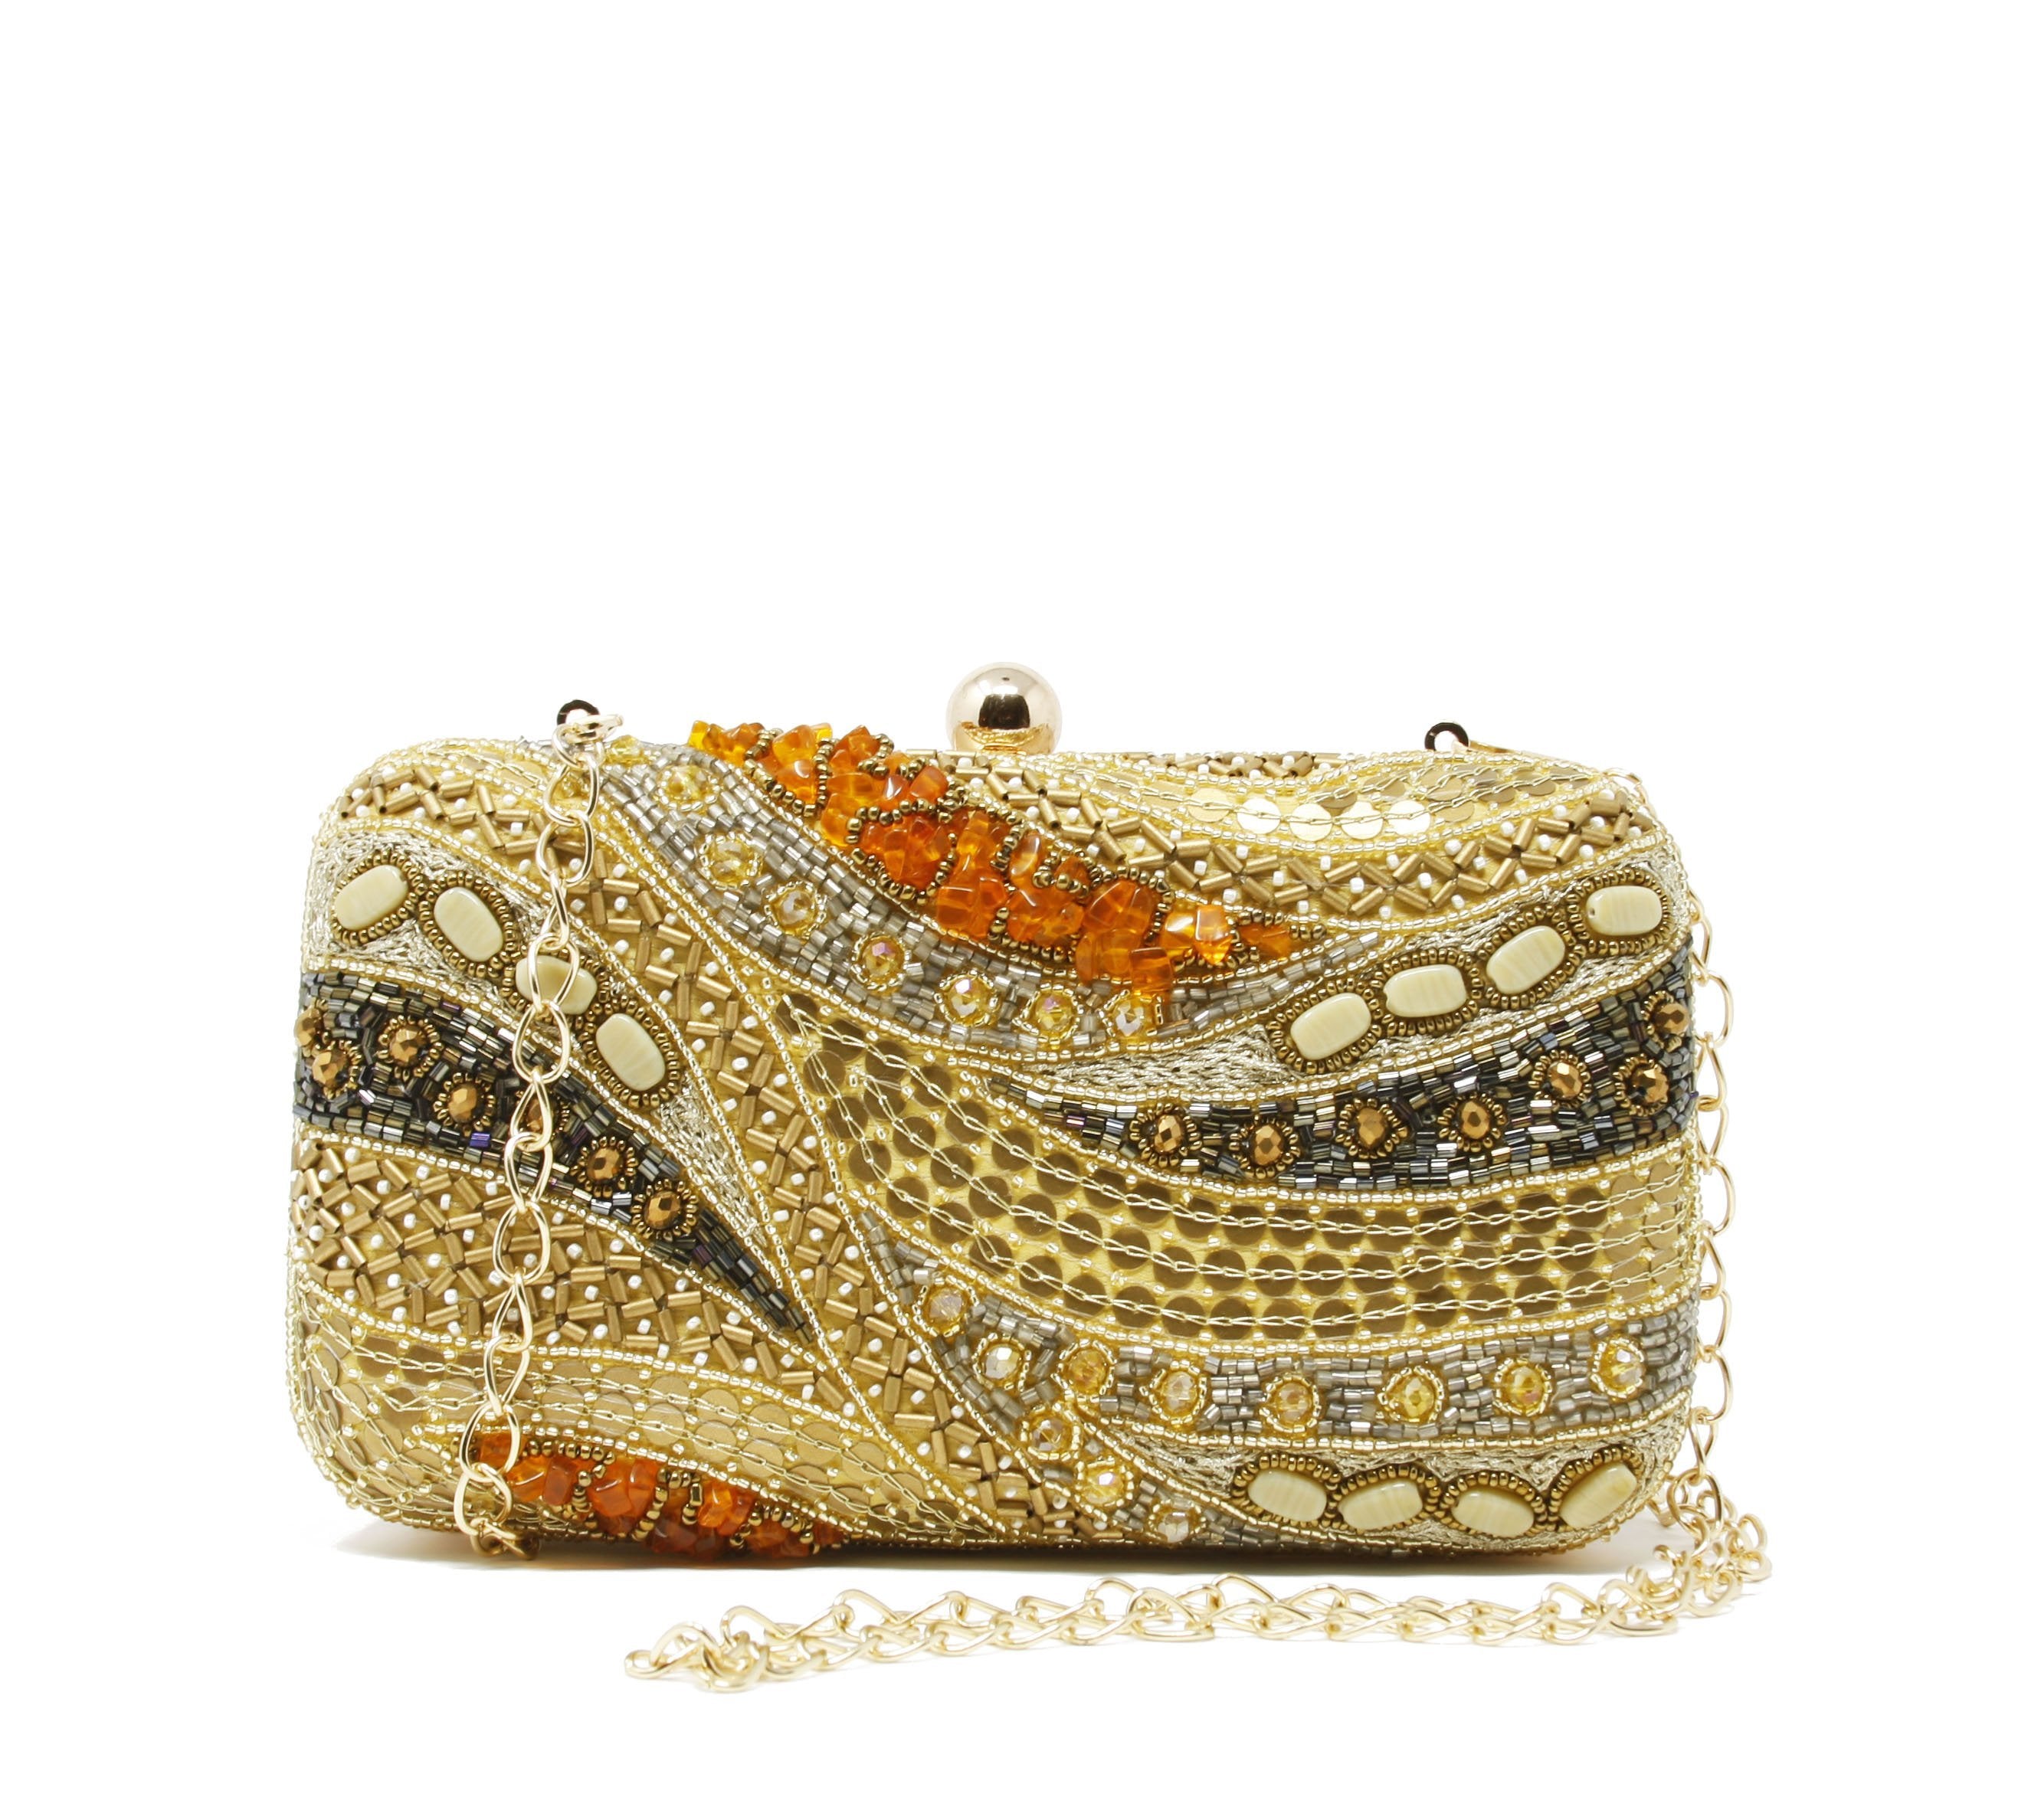 Multi-color Sparkly Gold Clutch.Strap with 23" drop for shoulder or crossbody wear